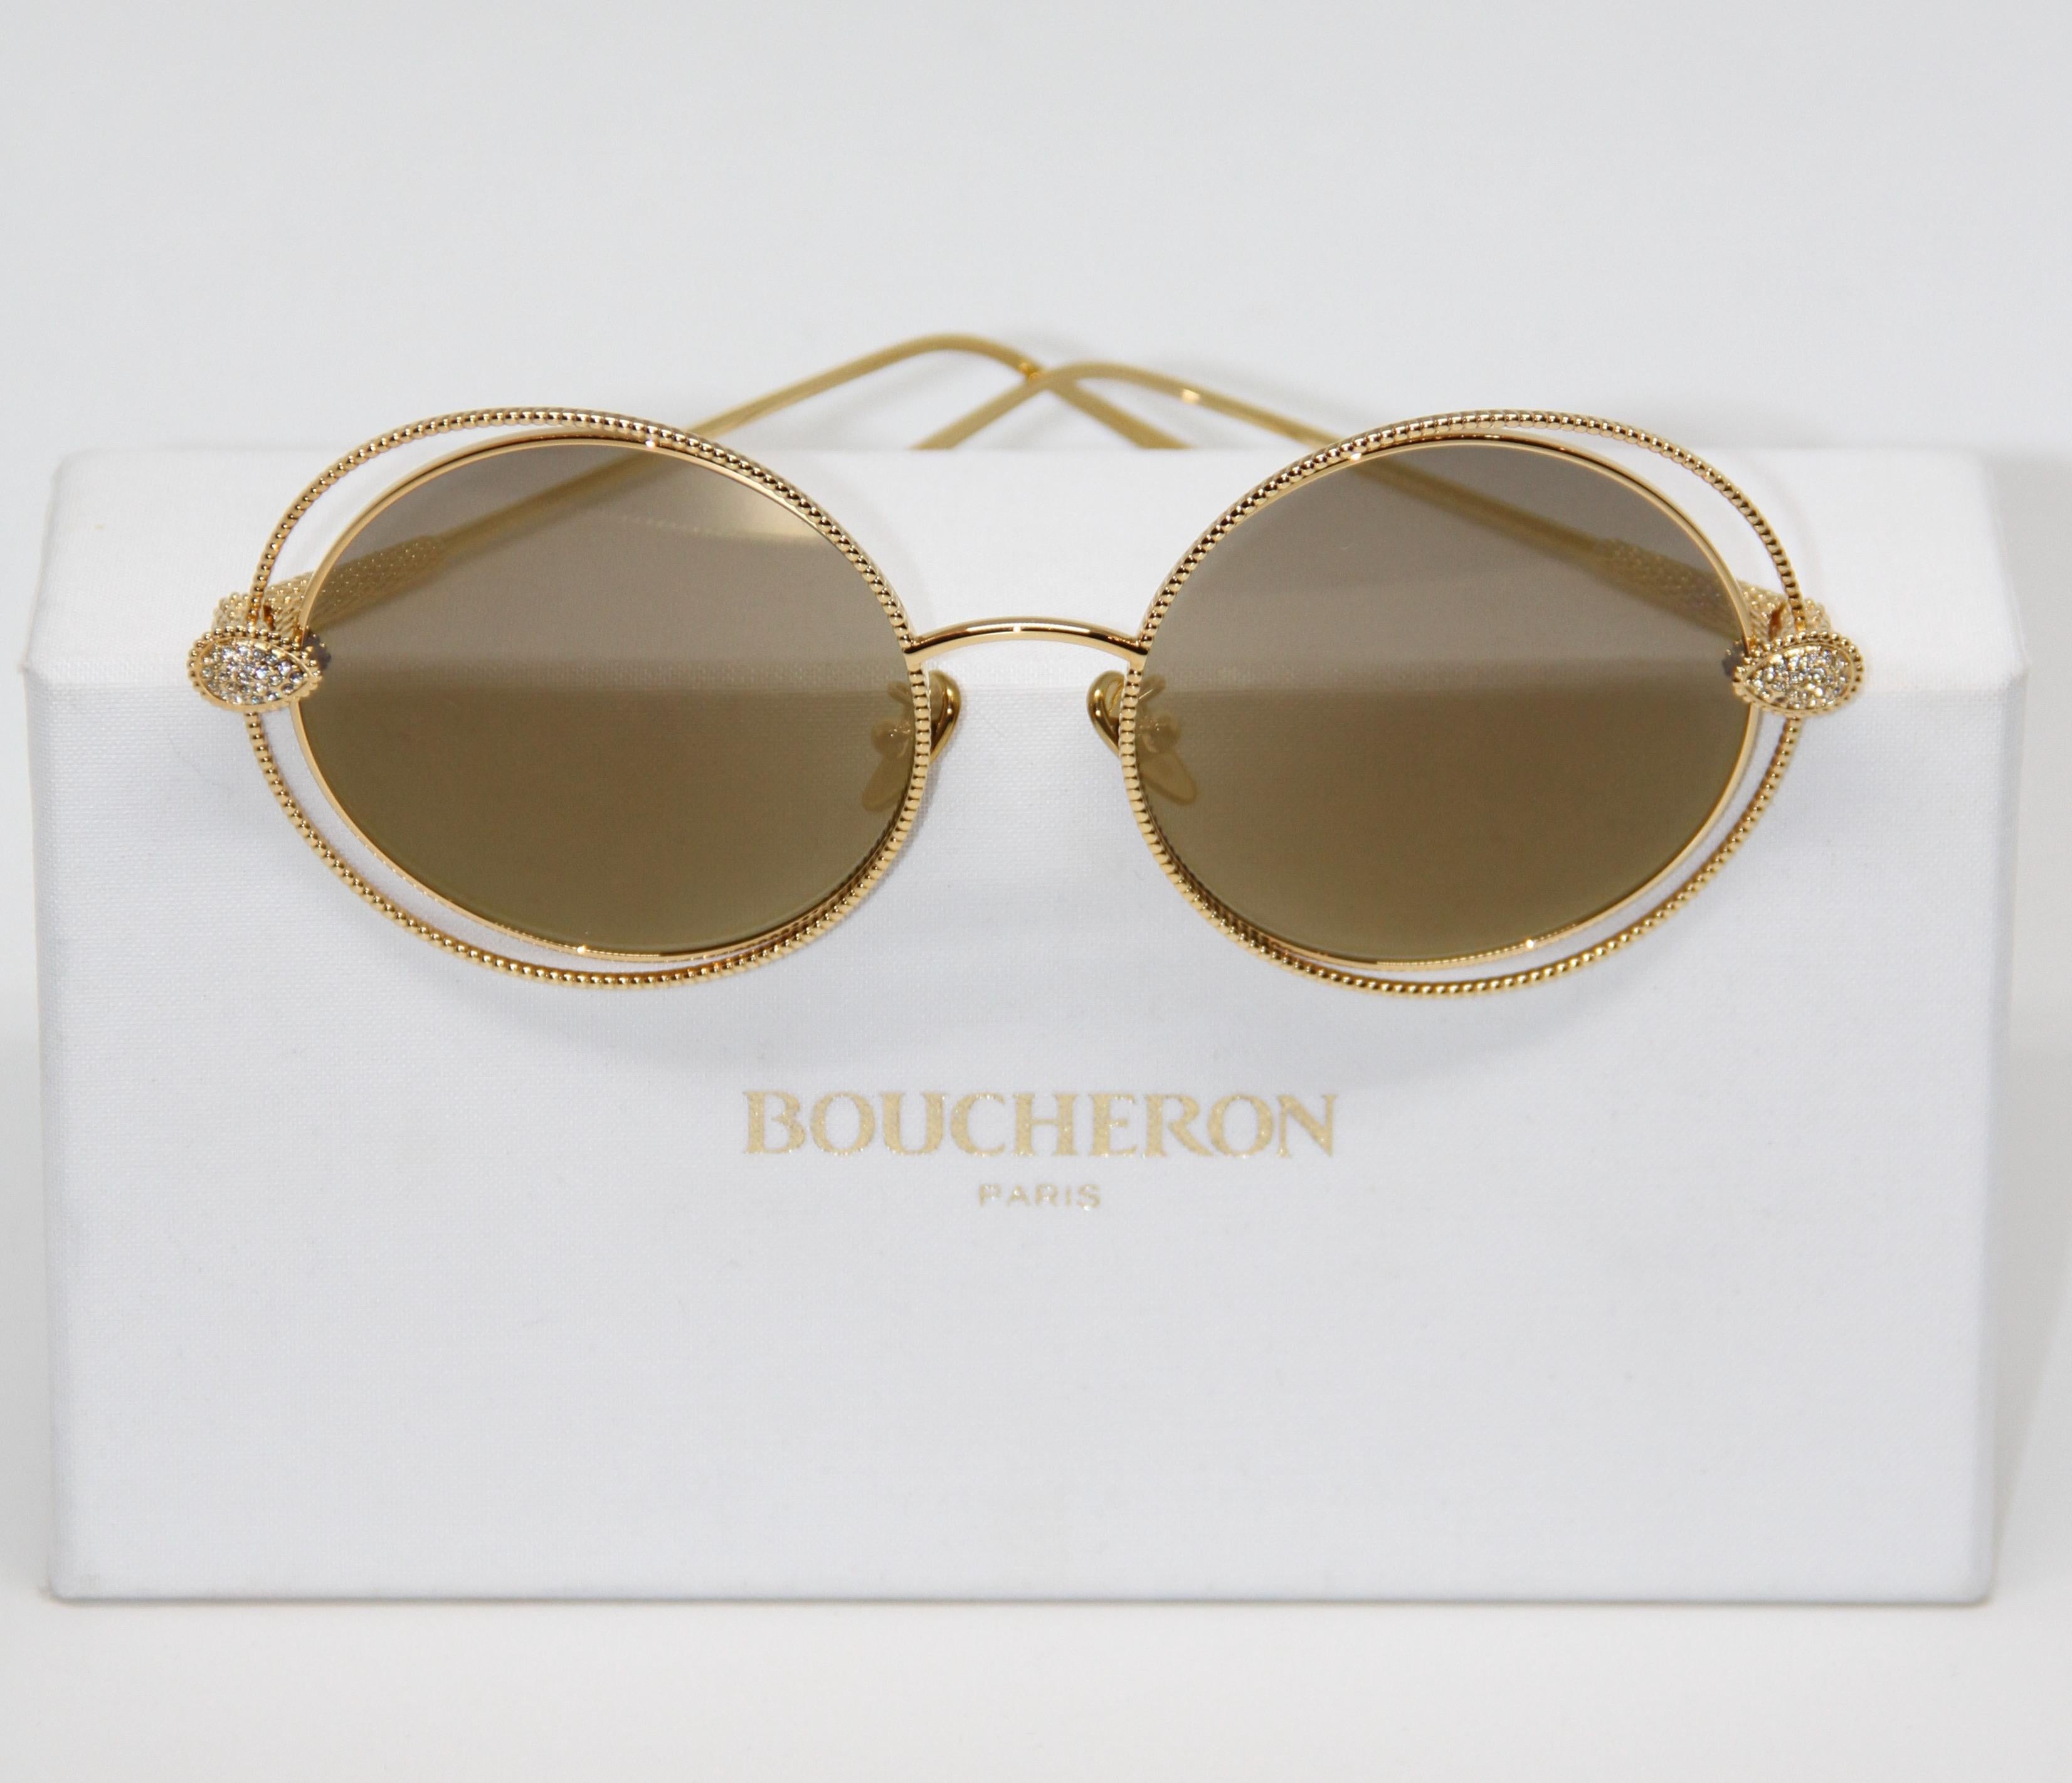 Inspired by the iconic Serpent Boheme, the Maison's protective spirit and symbol of eternity, this pre-owned Limited Edition oversized round Sunglasses is in gold finished metal with a twisted gold beads crown. The style features the symbolic snake